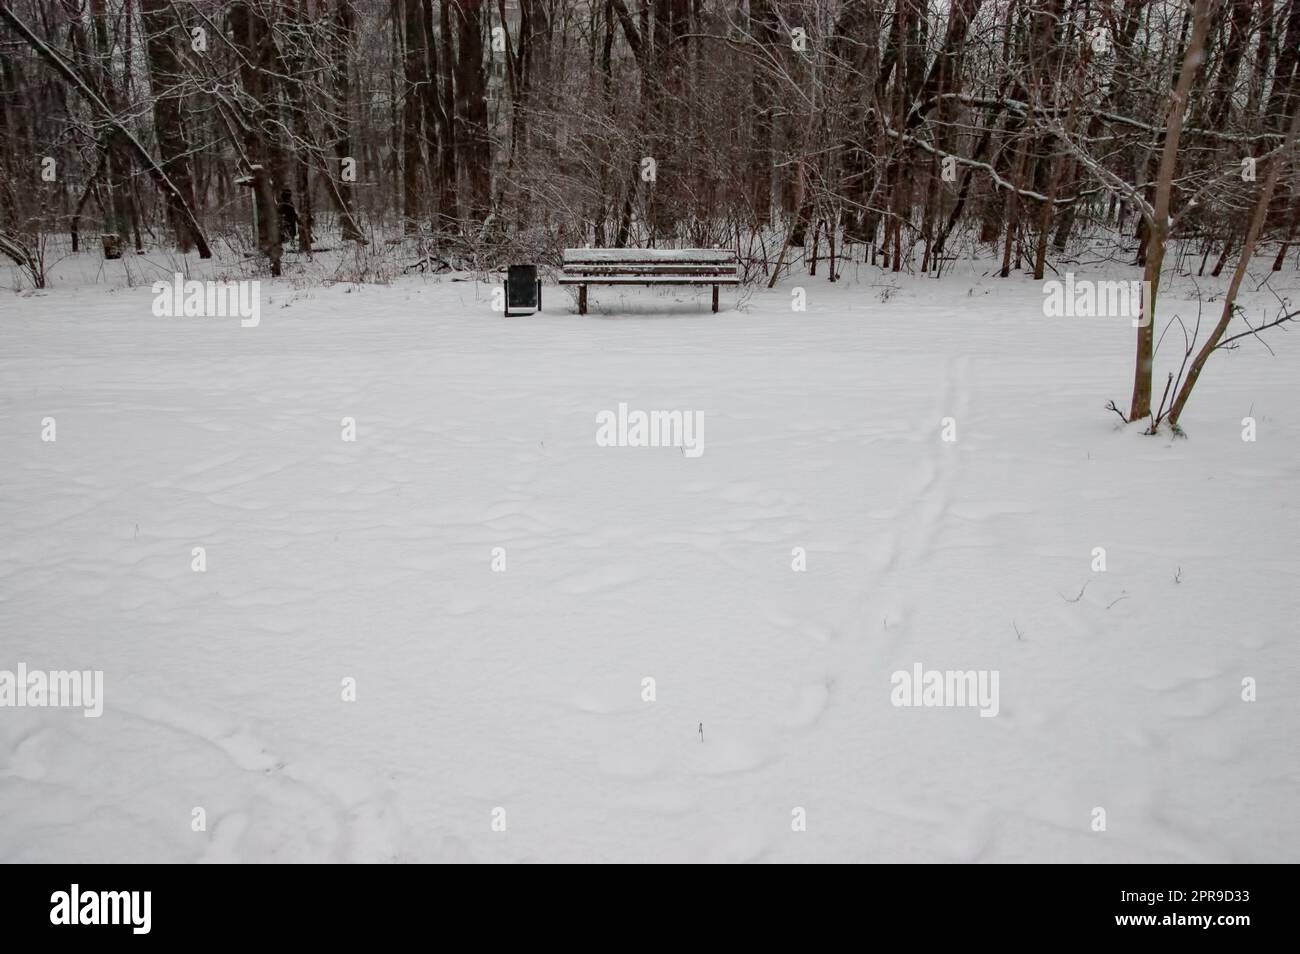 a lonely bench with an trashcan in the middle of a snow-covered forest Stock Photo